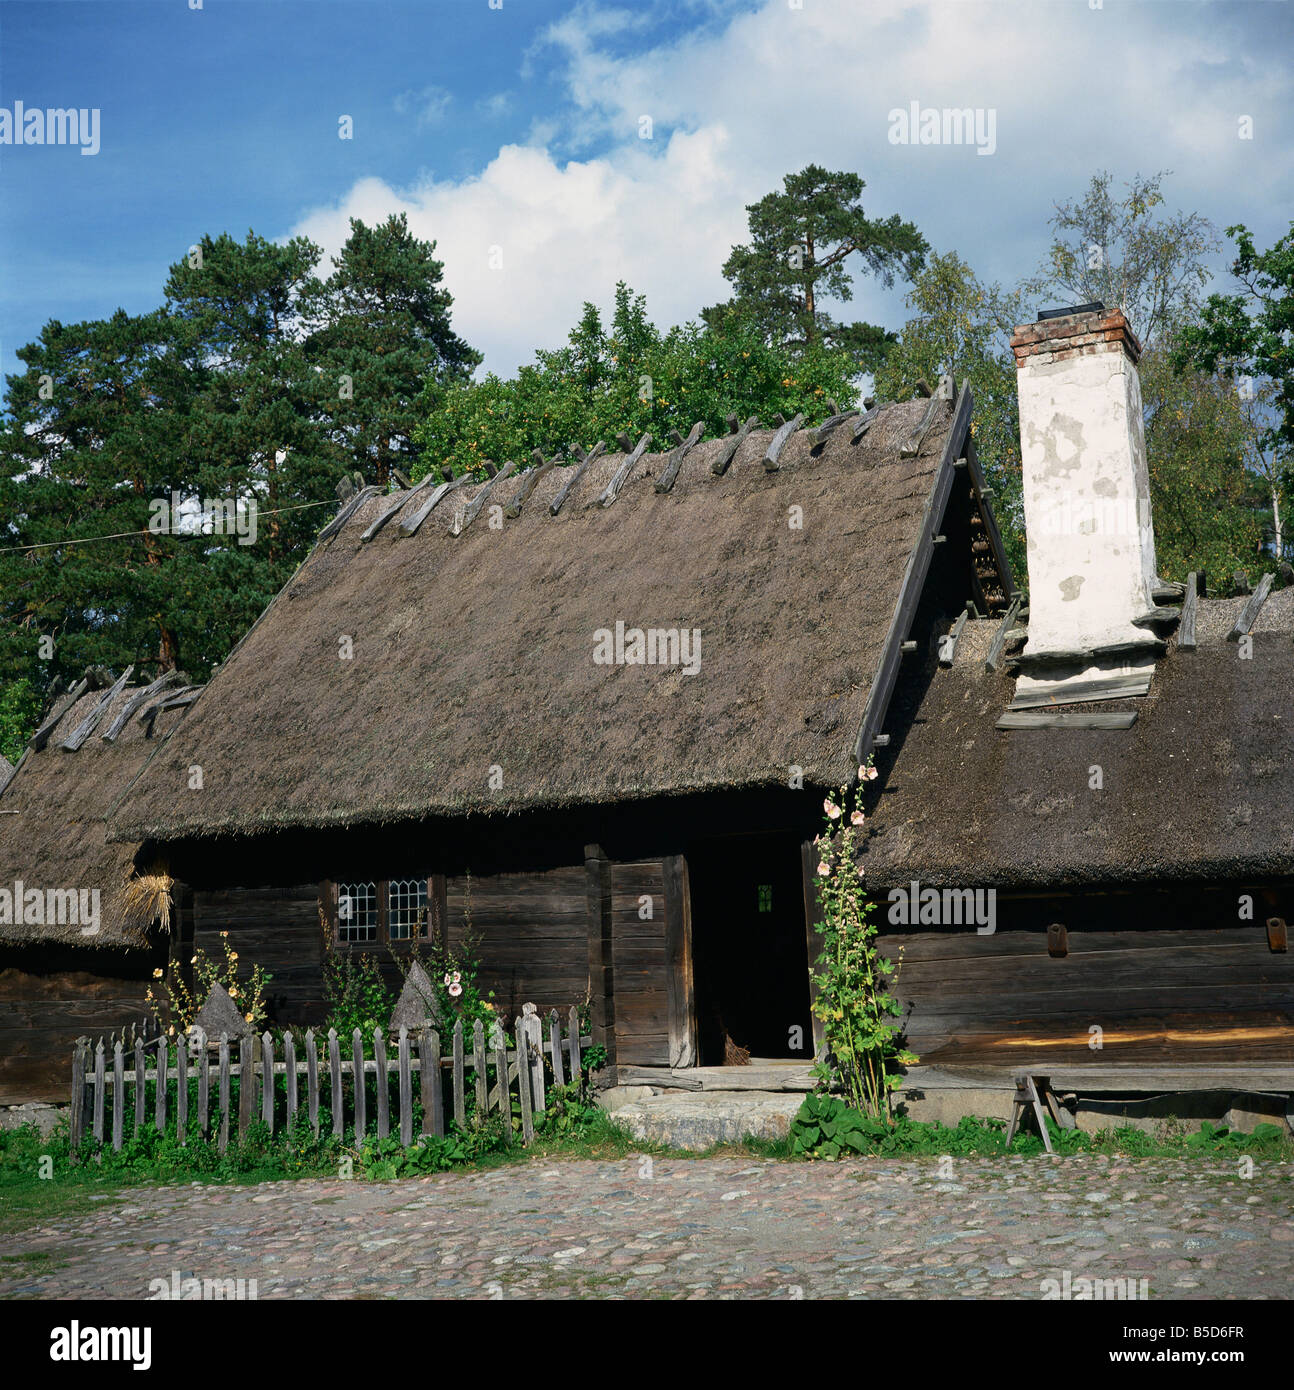 C18th wooden building with thatched roof of the Oktorp farmstead from Halland in the Skansen Open Air Museum in Stockholm Sweden Stock Photo